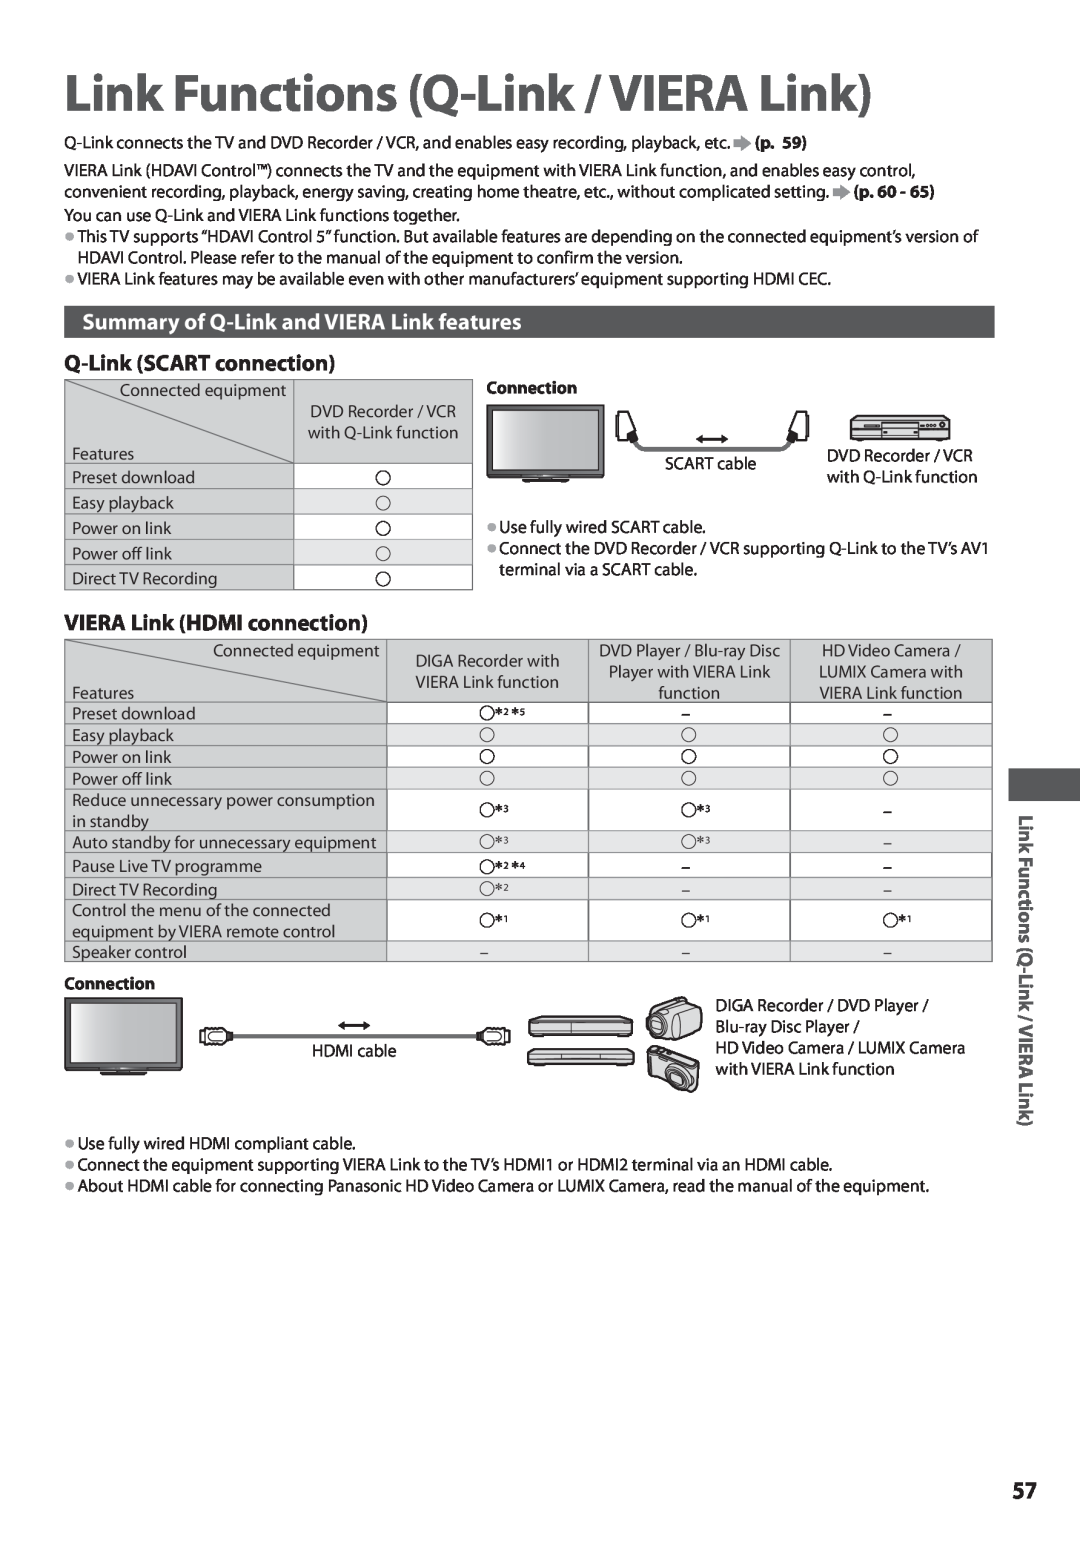 Panasonic TX-L42U3E Link Functions Q-Link / VIERA Link, Summary of Q-Link and VIERA Link features, Q-Link SCART connection 